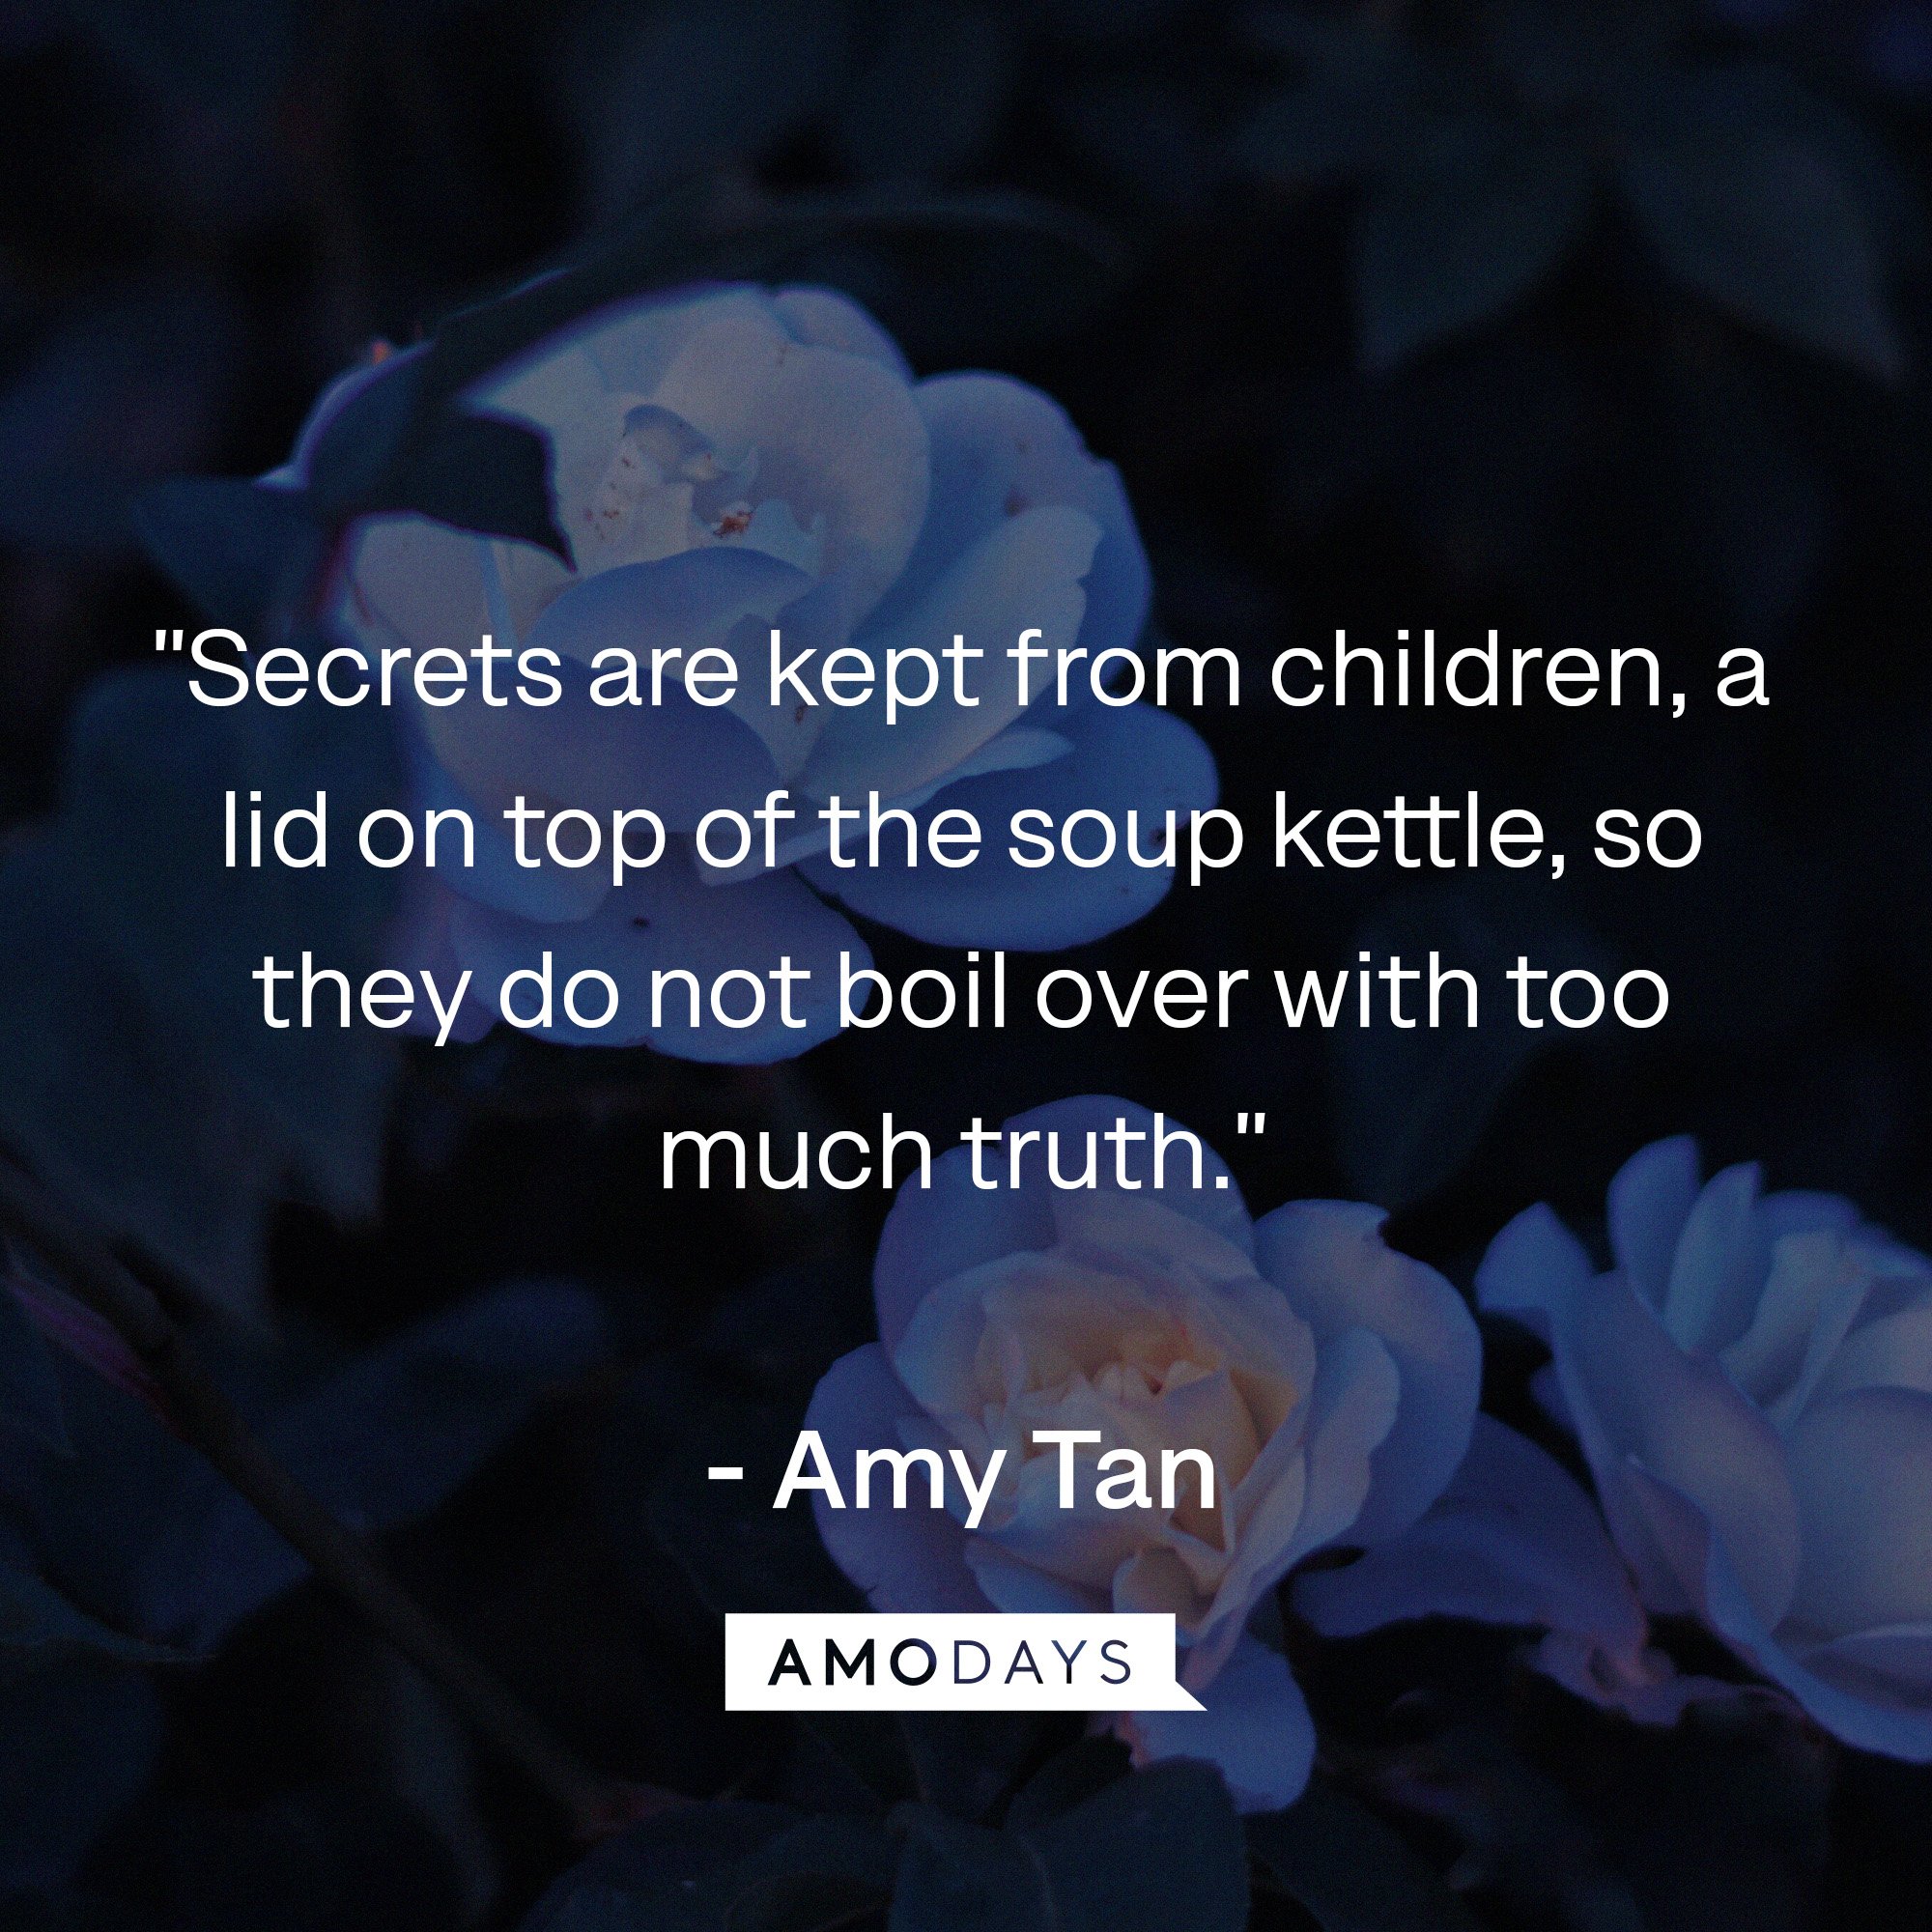  Amy Tan's quotes: "Secrets are kept from children, a lid on top of the soup kettle, so they do not boil over with too much truth."   | Image: AmoDays